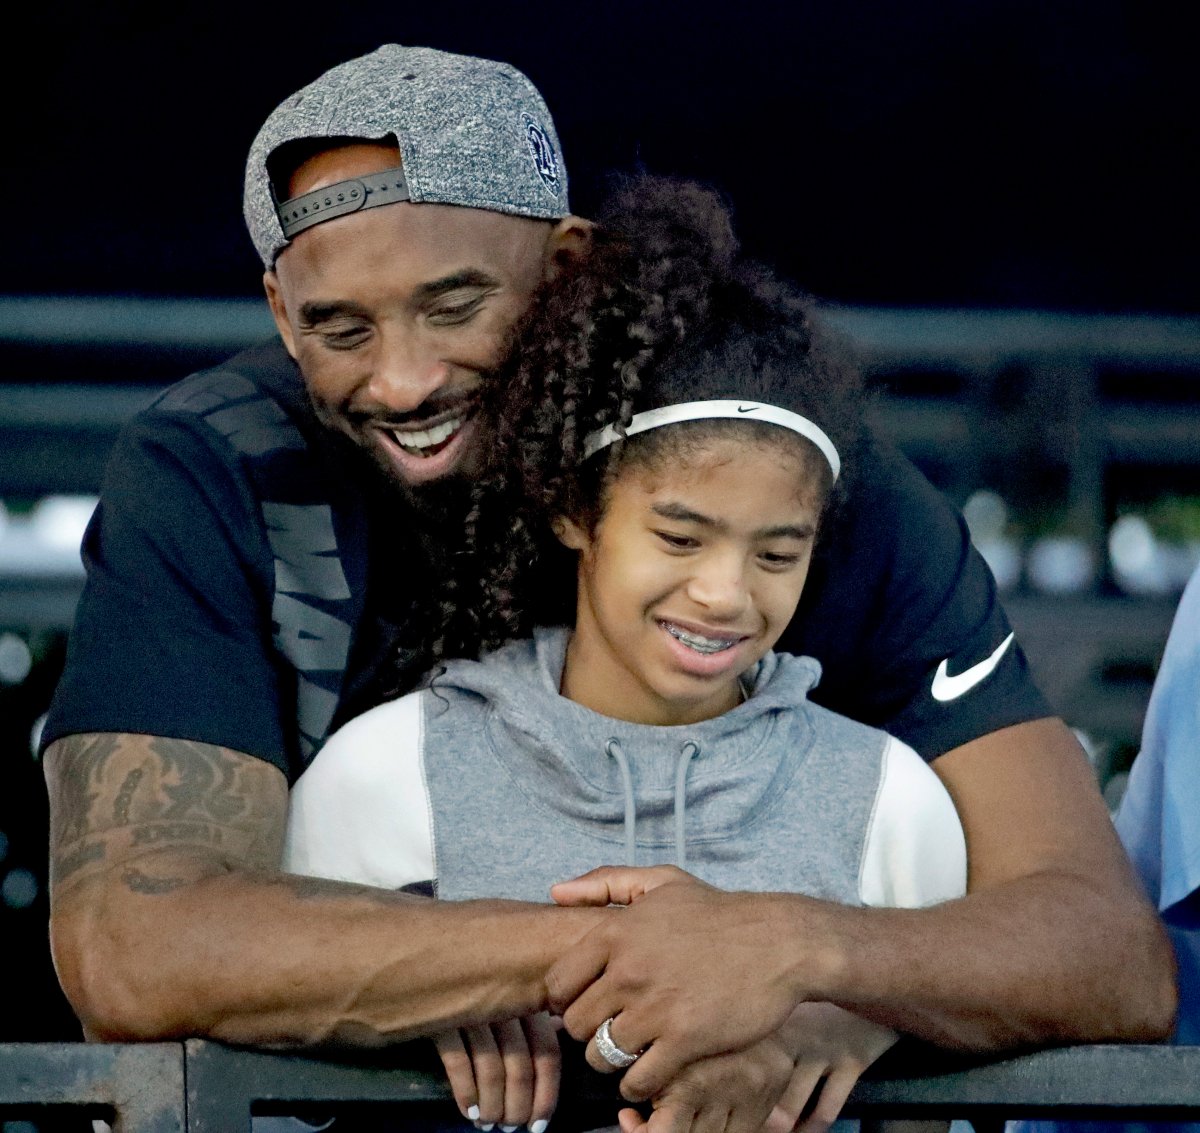 FILE - In this July 26, 2018, file photo, former Los Angeles Laker Kobe Bryant and his daughter Gianna watch during the U.S. national championships swimming meet in Irvine, Calif.